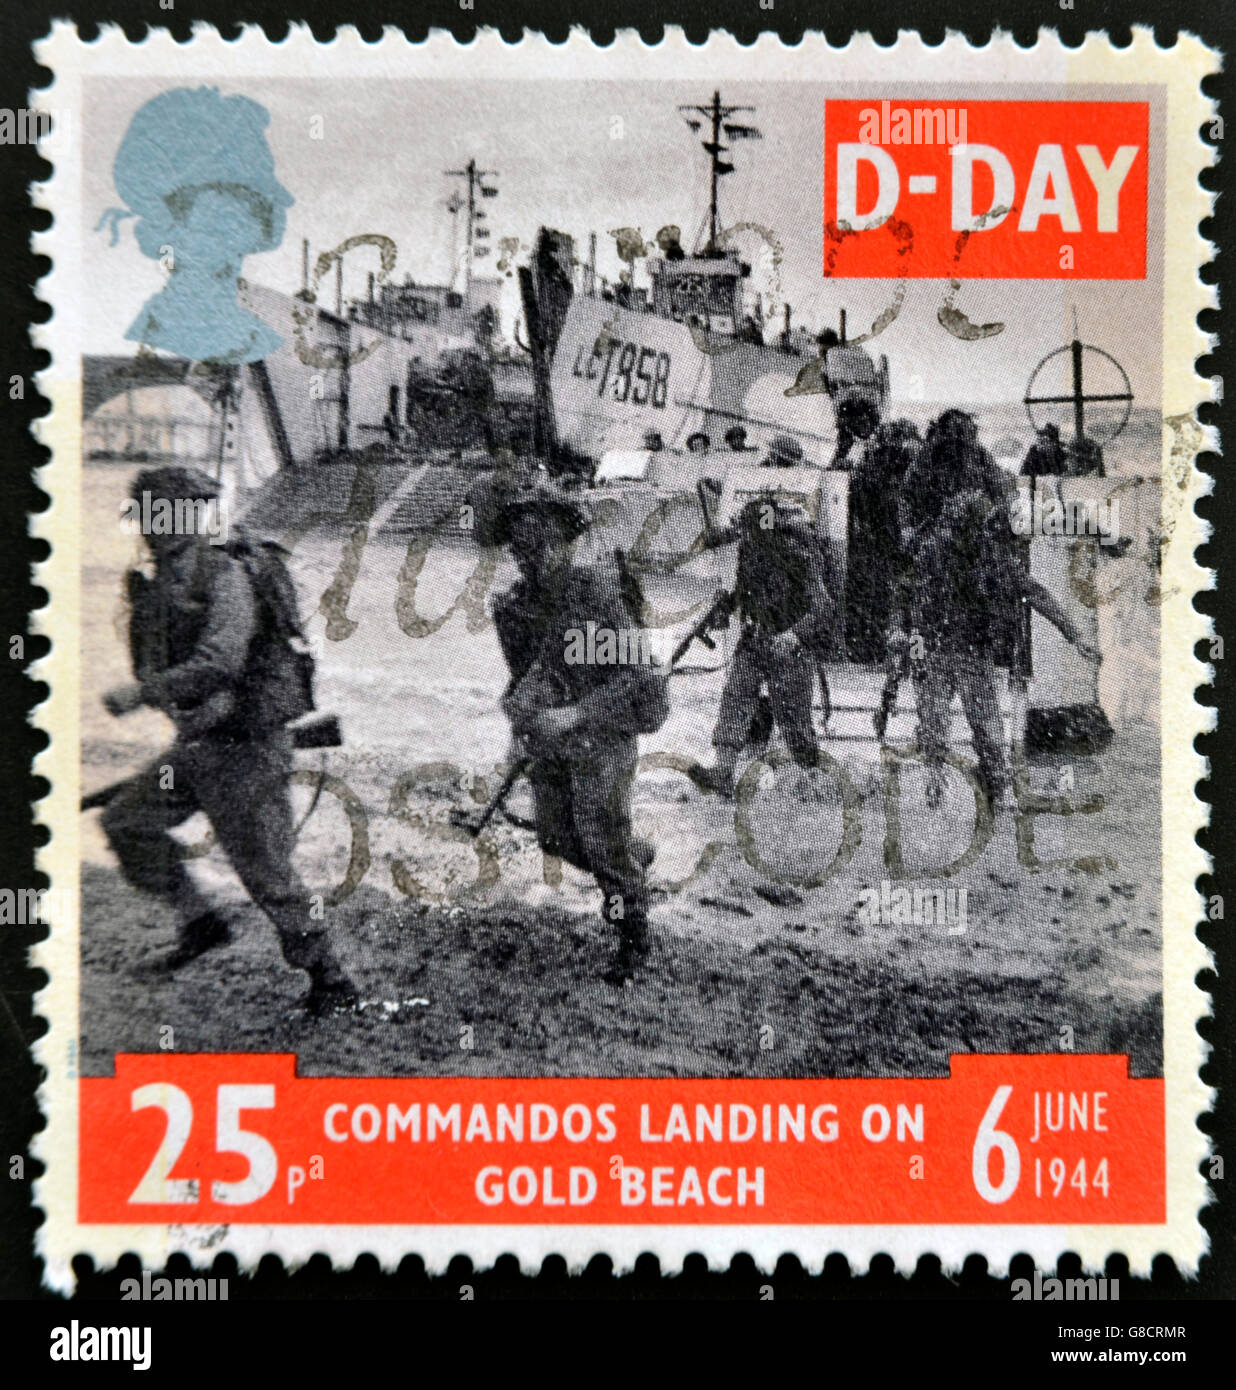 UNITED KINGDOM - CIRCA 1994: a stamp printed in Great Britain shows image of soldiers on Gold Beach in Normandy, commemorating D Stock Photo